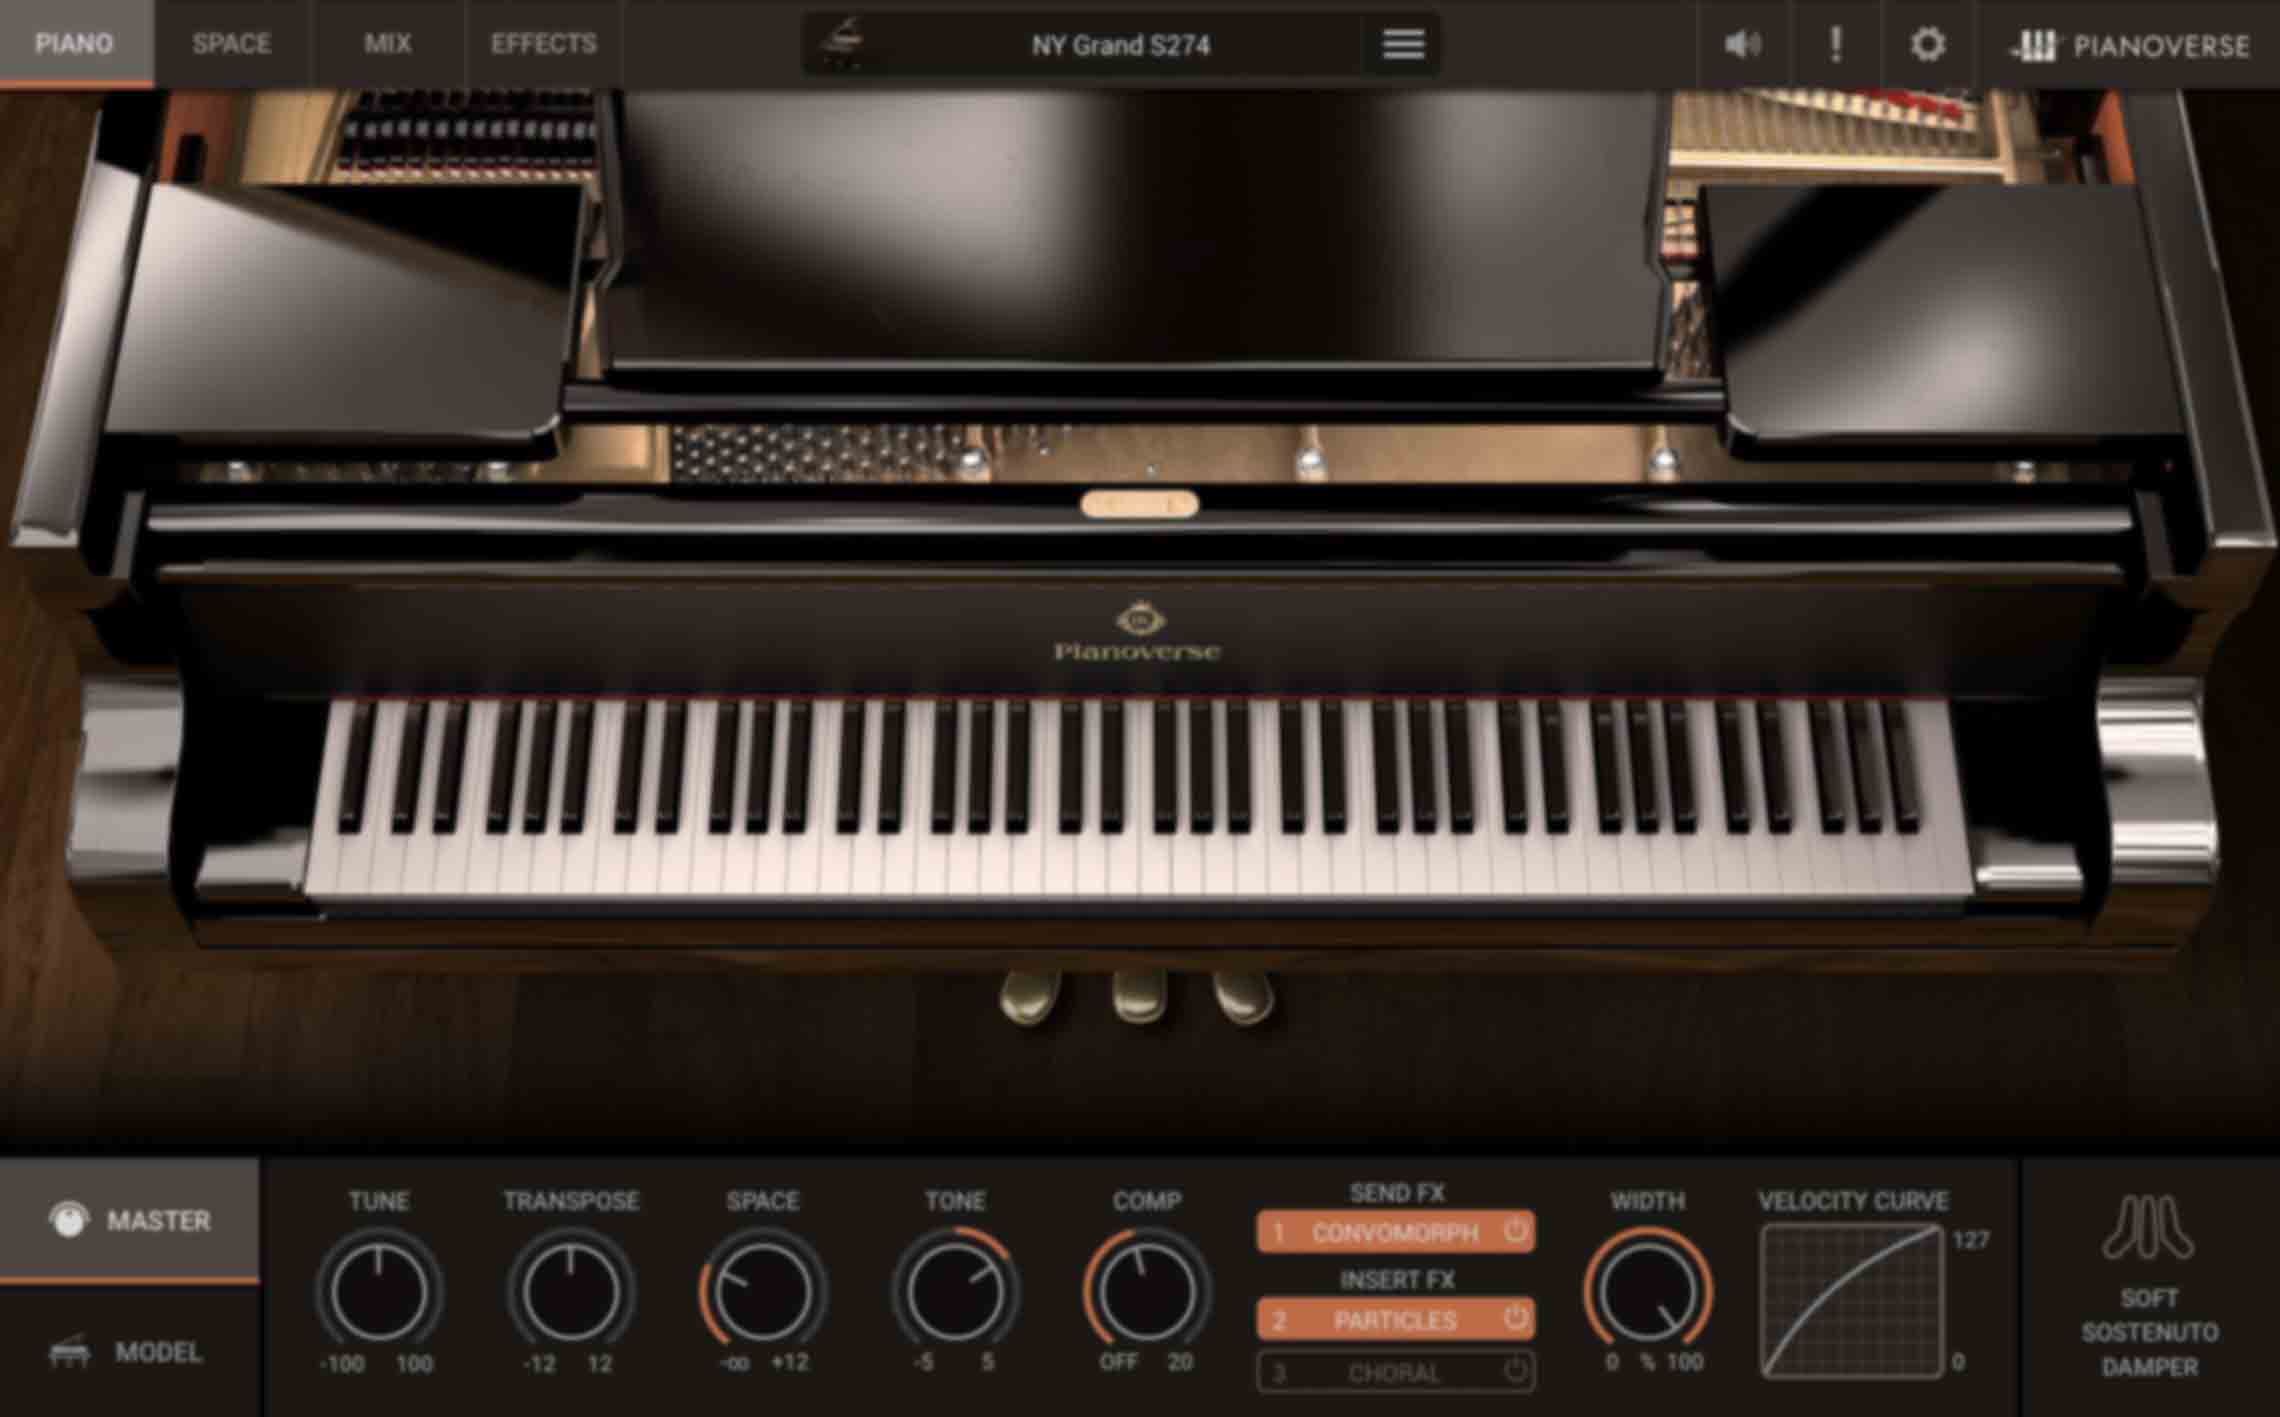 PIANO/MASTER - Provides settings for the overall piano performance